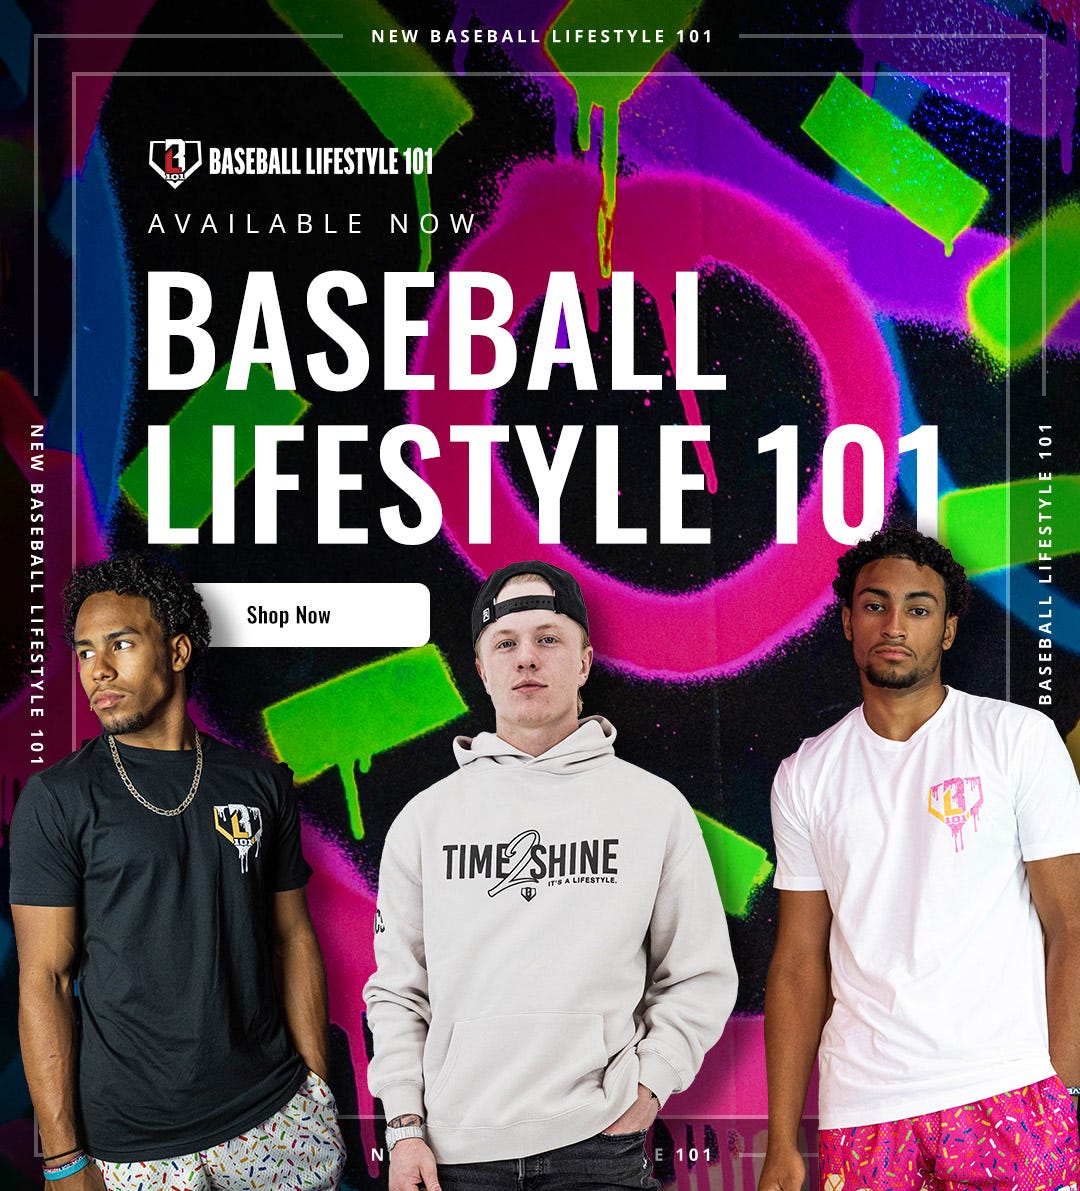 Baseball Lifestyle 101: Baseball is more than a game, it’s a lifestyle